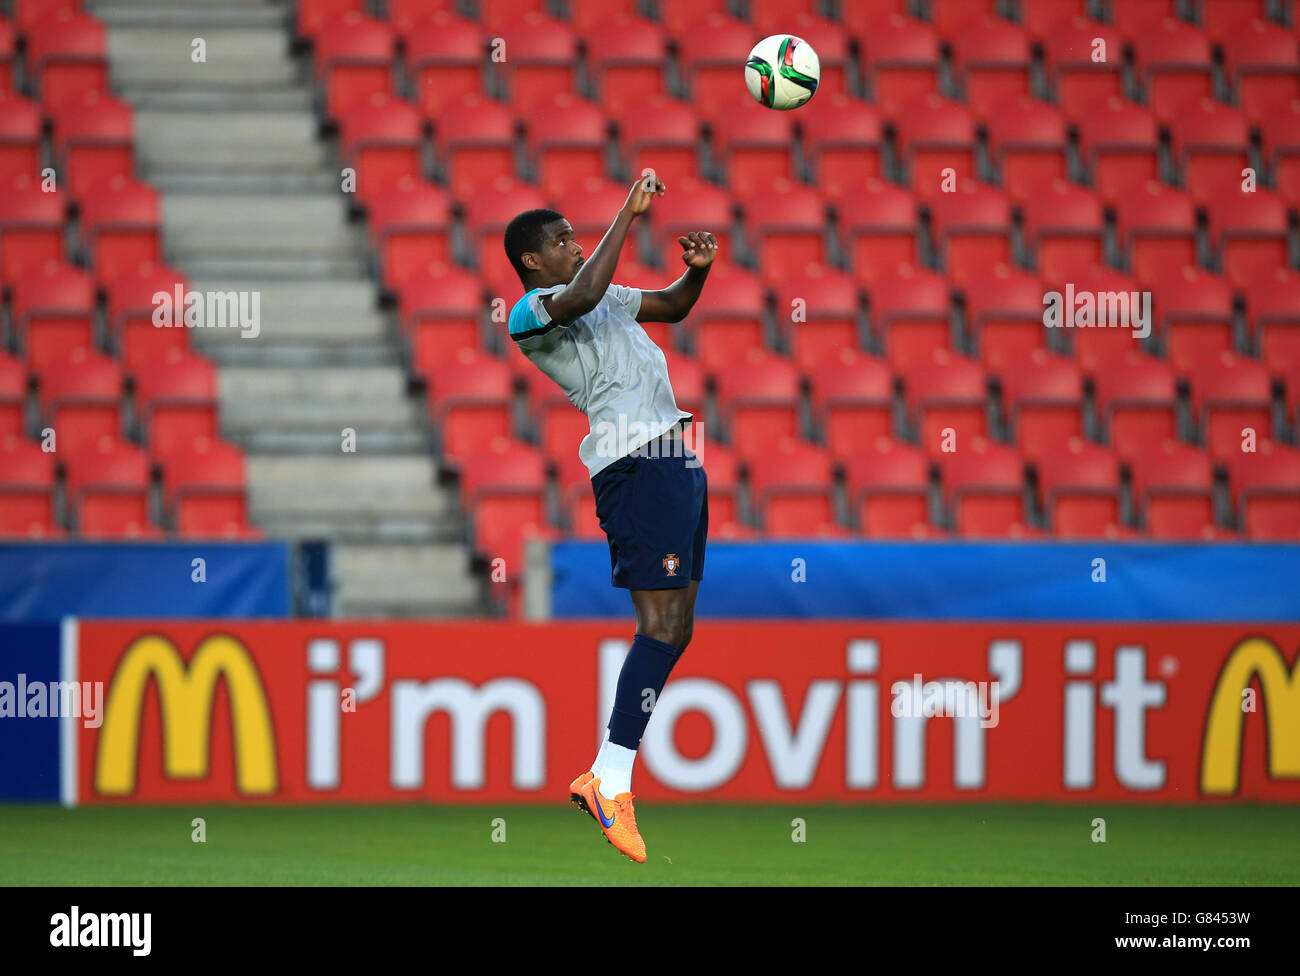 Portugal's William Carvalho keeps his eyes on the ball during the training session Stock Photo